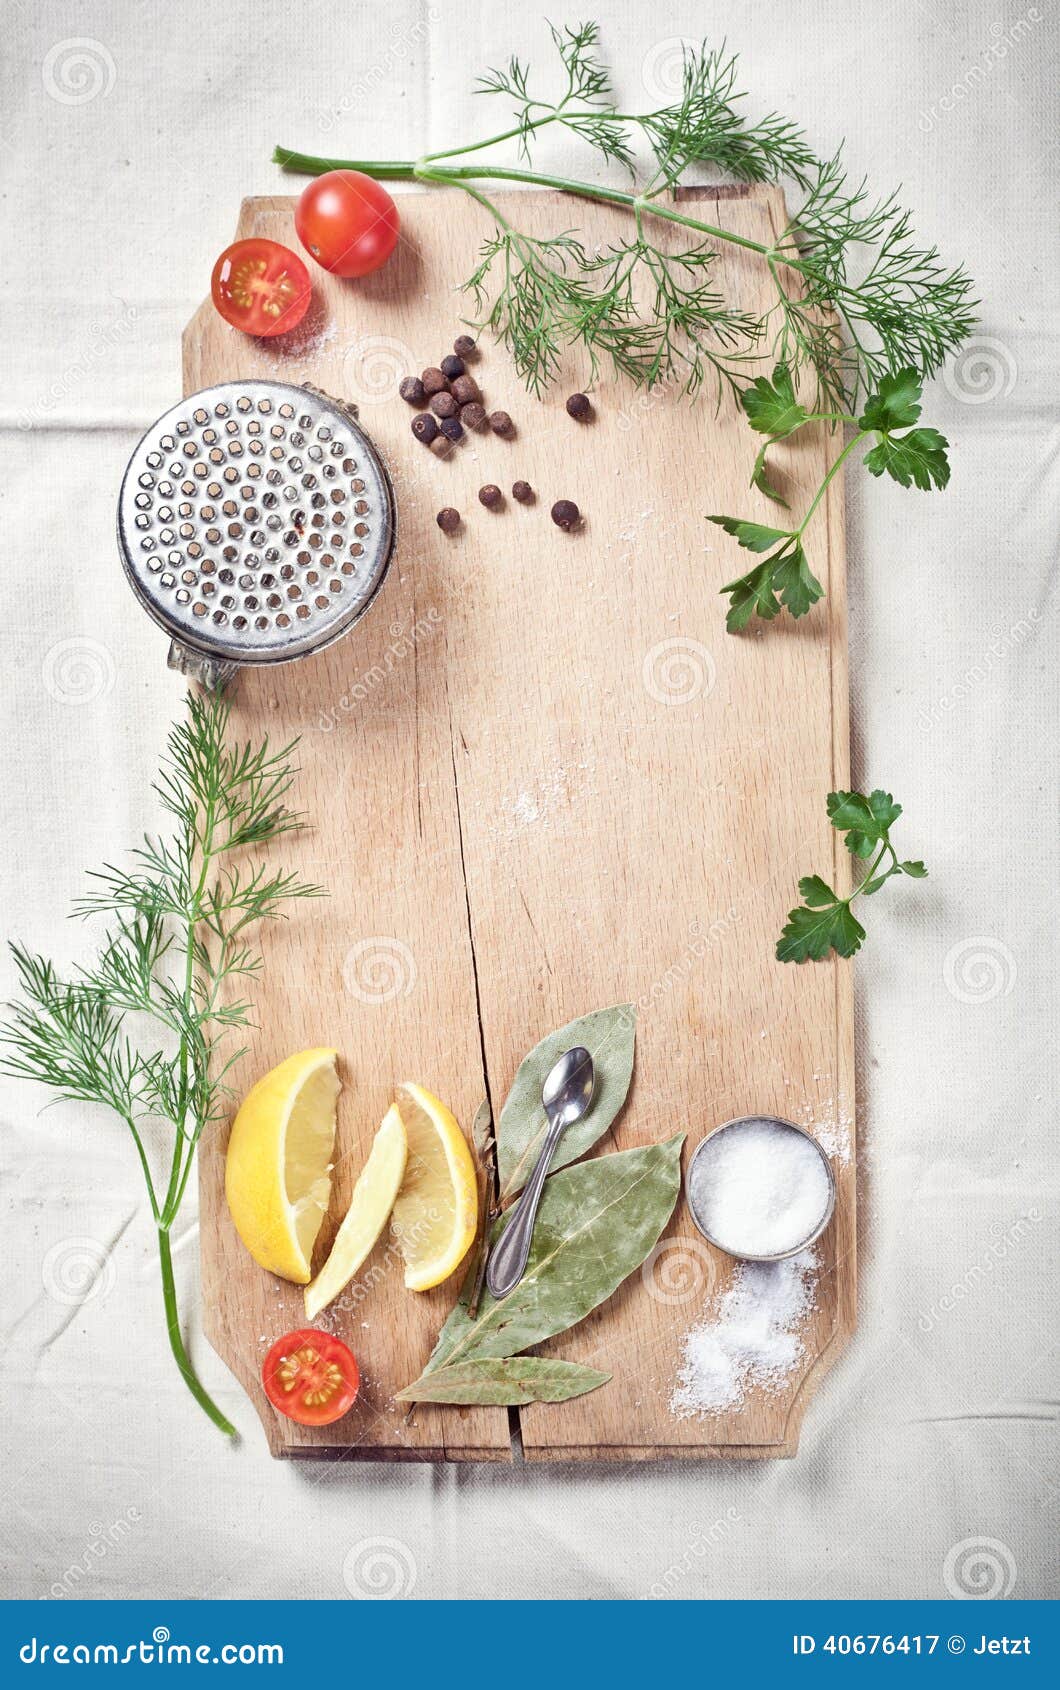 https://thumbs.dreamstime.com/z/kitchen-utensils-spices-herbs-cooking-fish-wooden-cutting-board-space-text-40676417.jpg